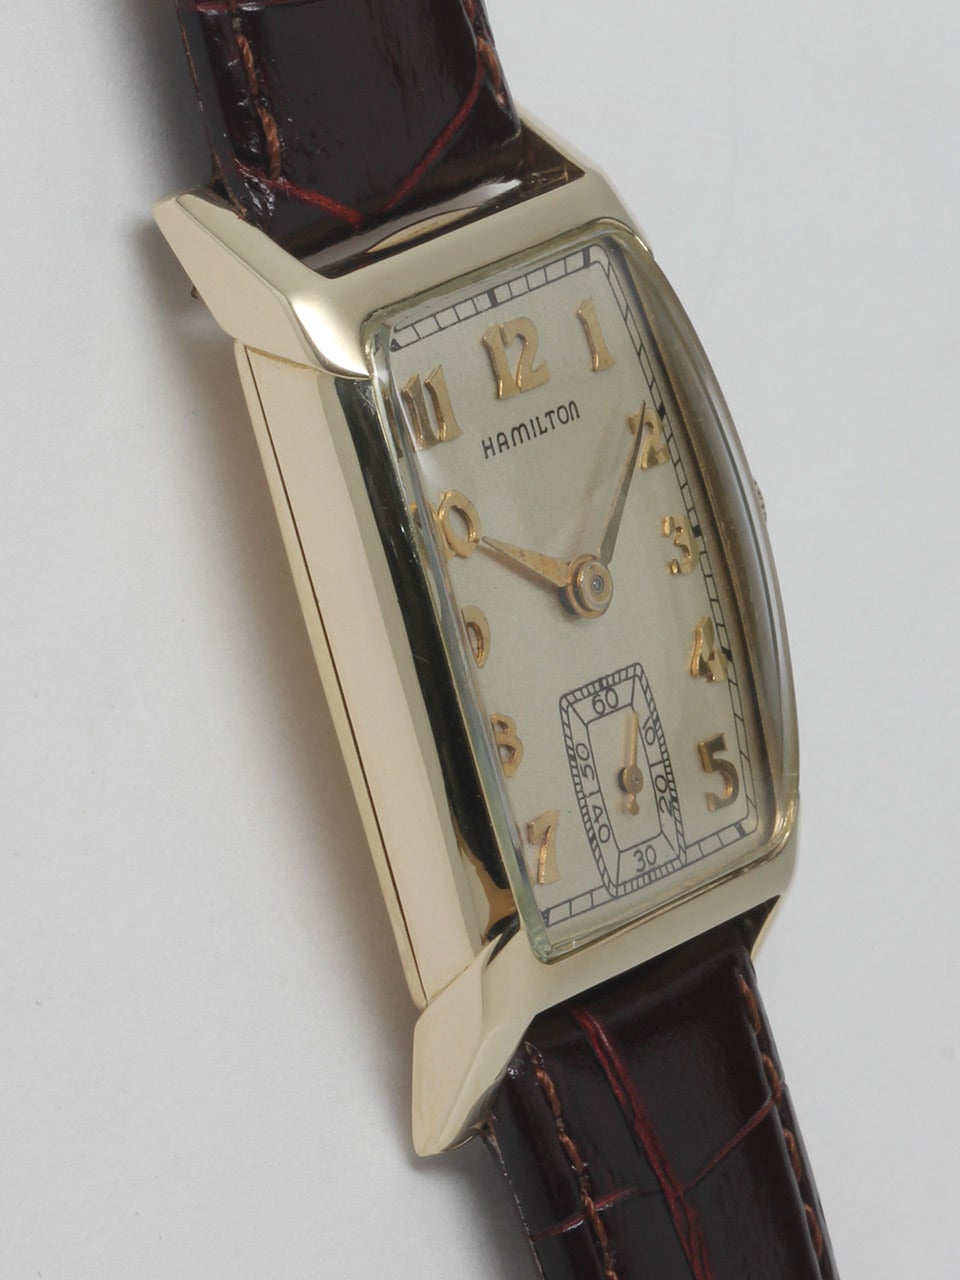 Hamilton 14k yellow gold Donald wristwatch, circa 1940s. 21.5 x 36mm tonneau case with glass crystal. Satin silvered dial with applied gold Arabic numerals and hands. 17-jewel manual-wind movement with subsidiary seconds. Clean, classic model